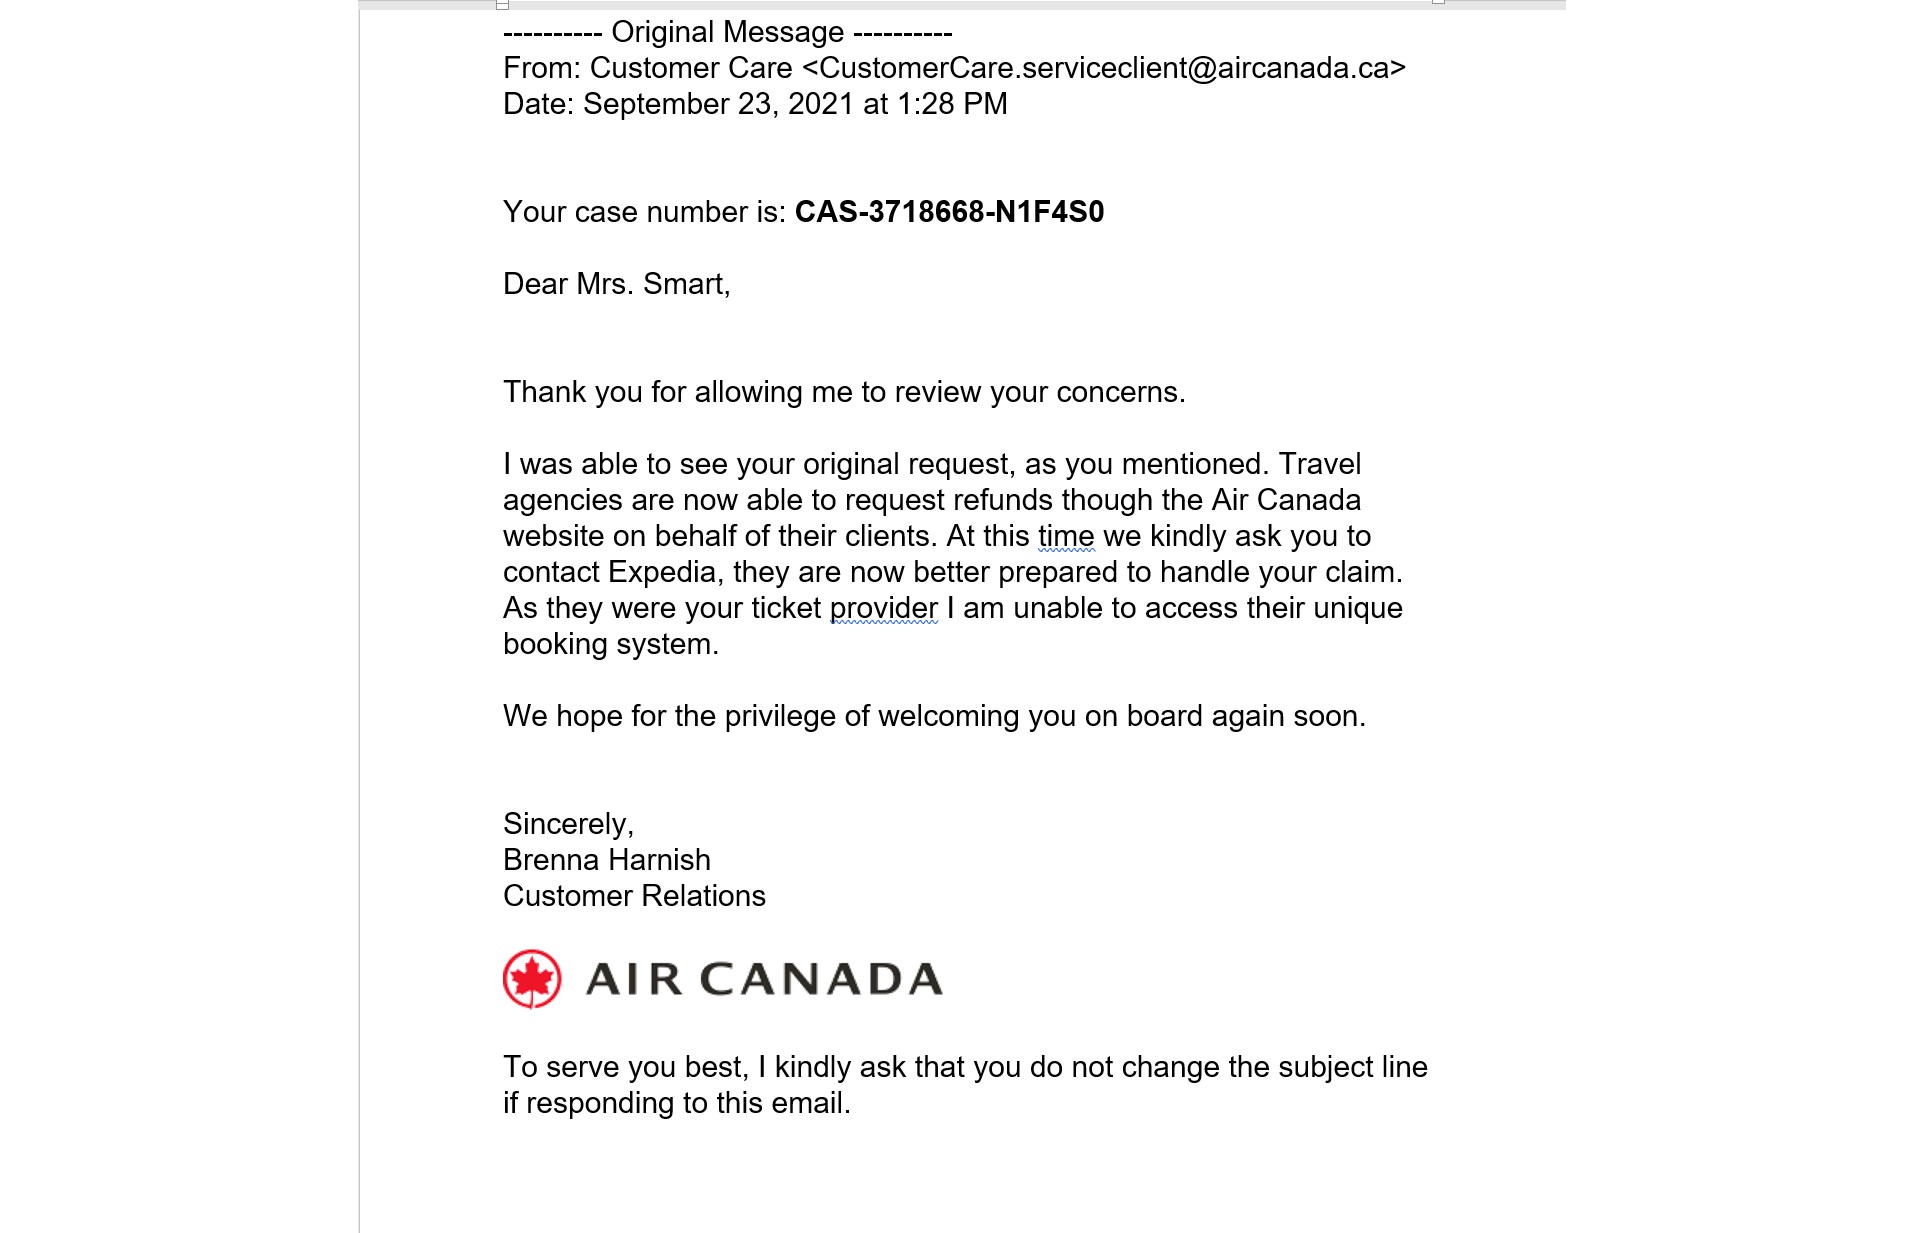 email from Air Canada on April 28, 2021 approving 